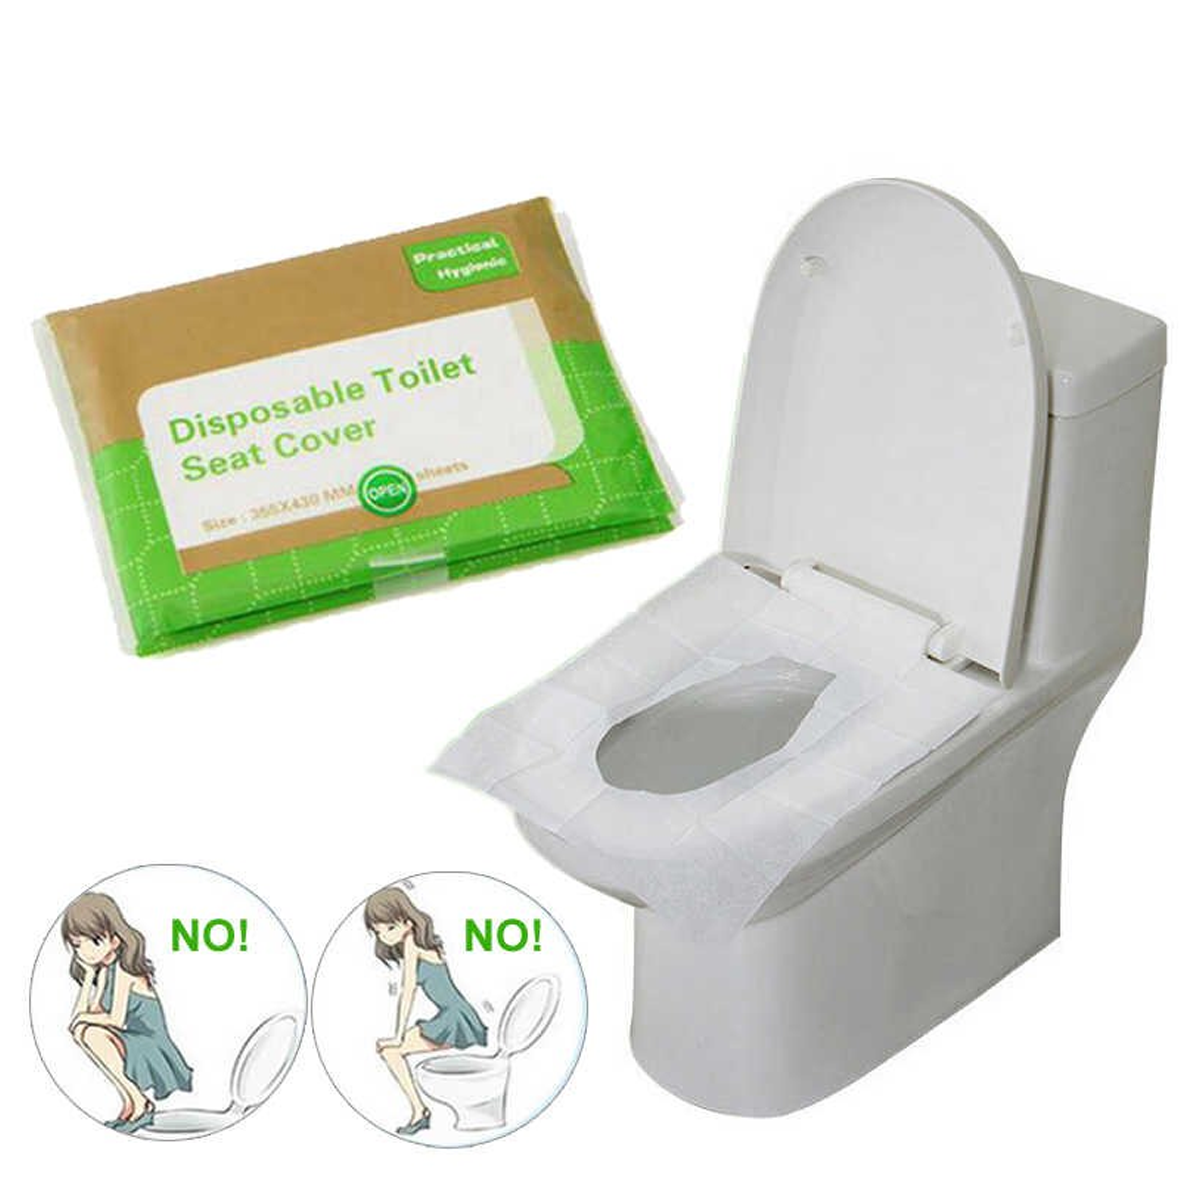 Portable Disposable Toilet Seat Cover Mat For Travel Camping 50Pcs / Pack